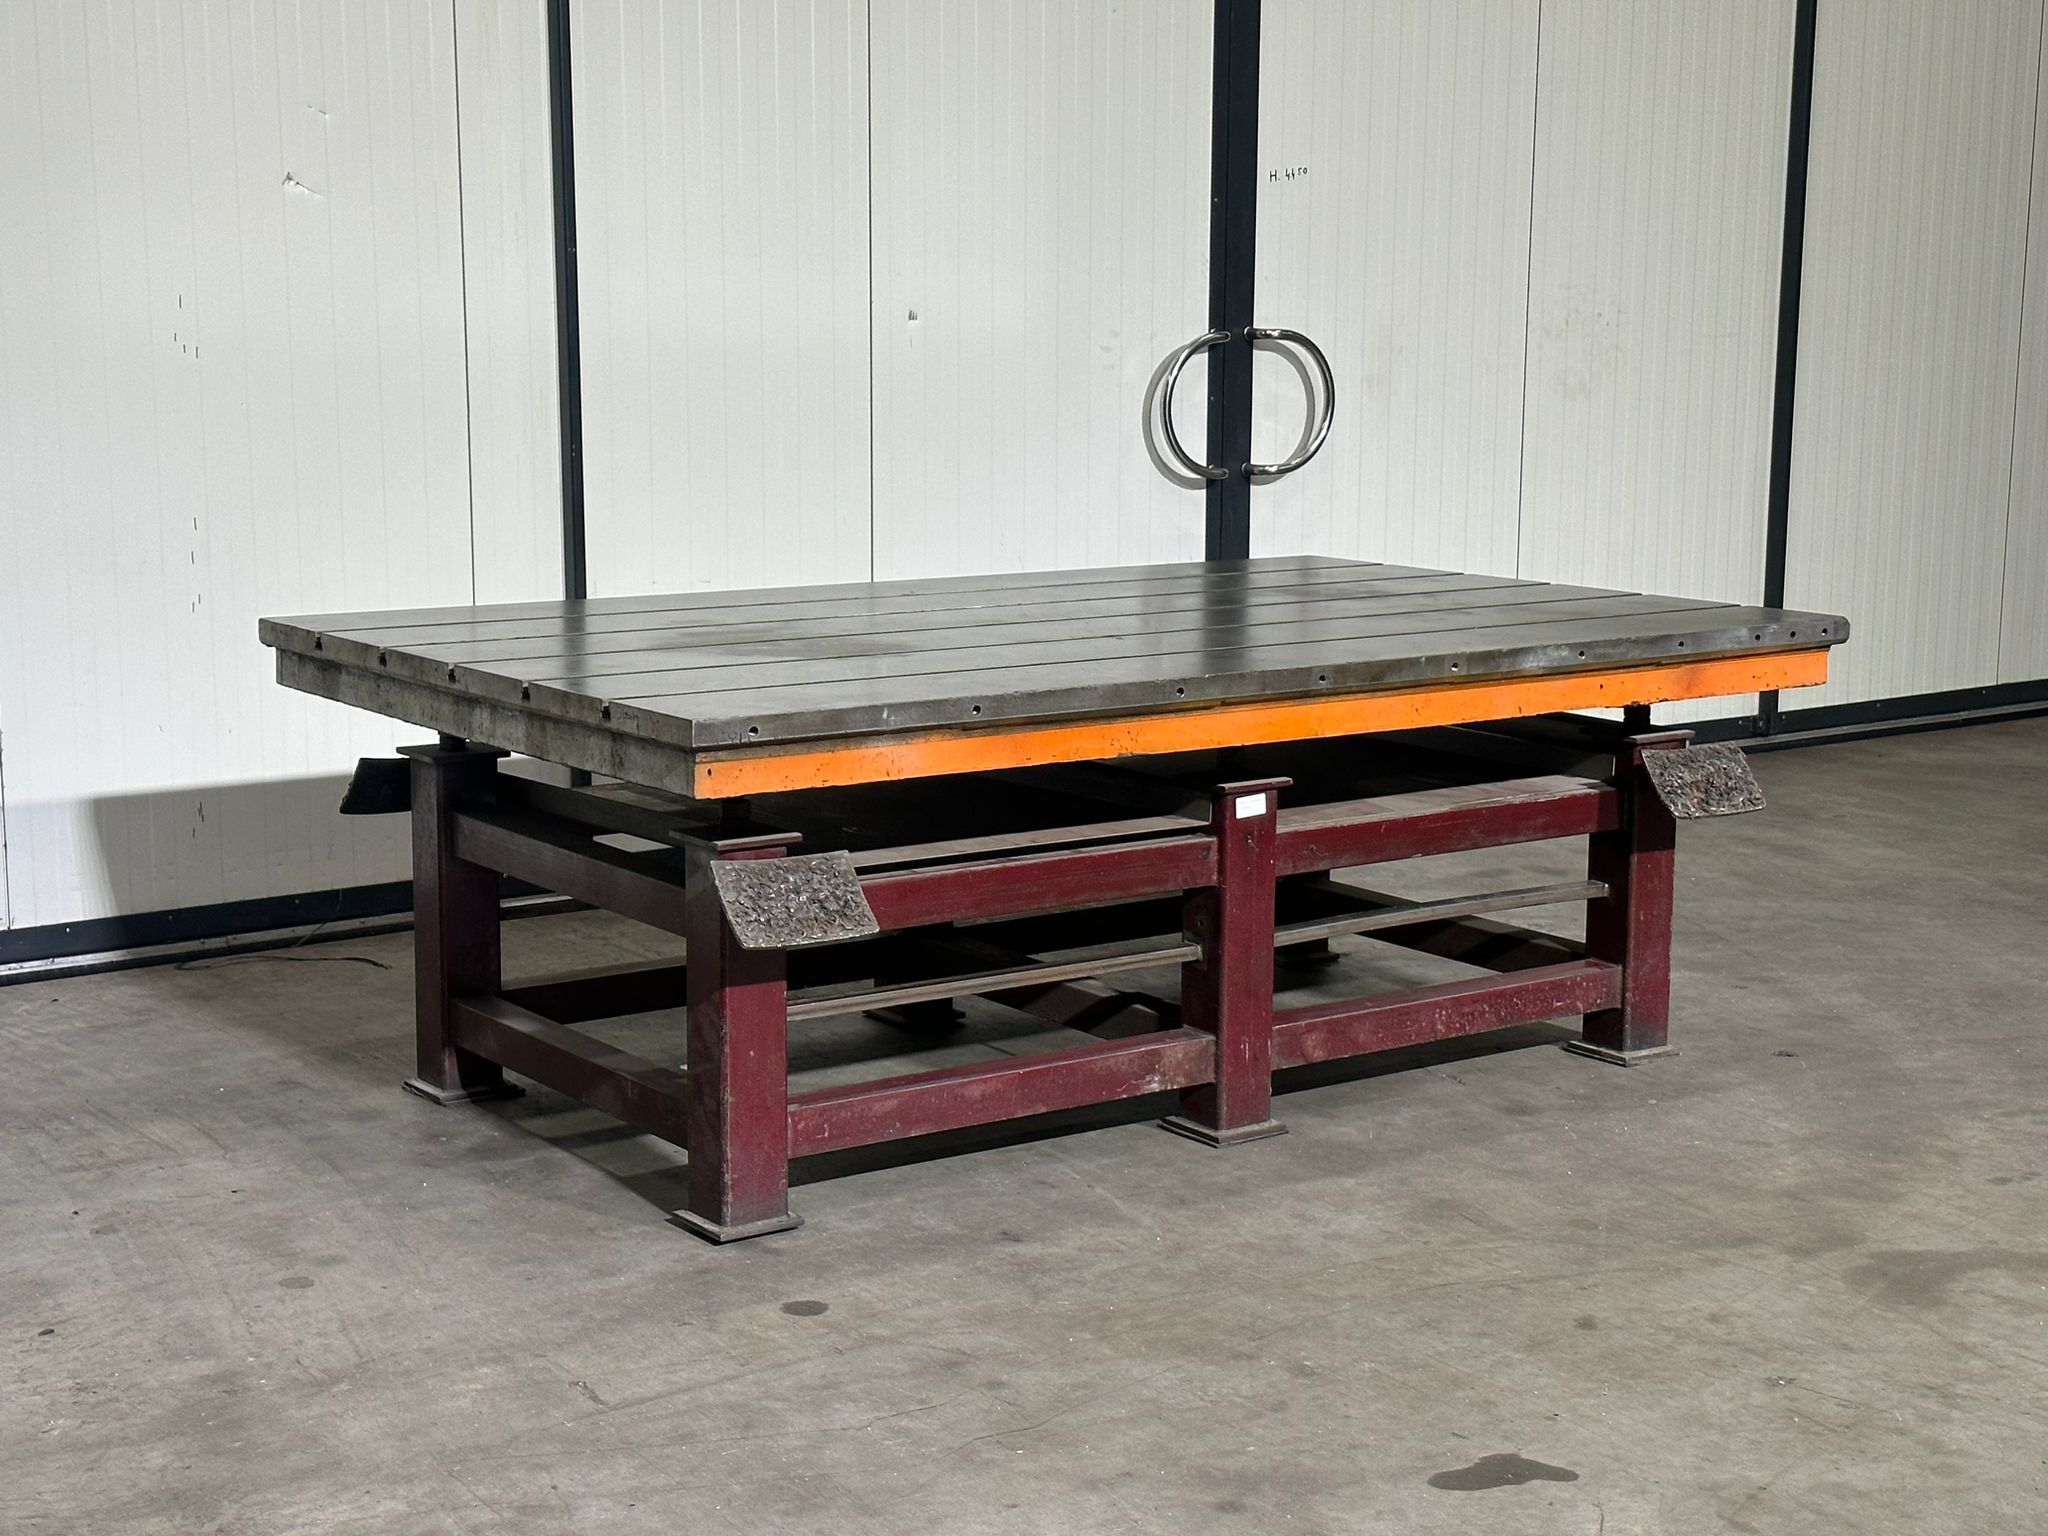 STOLLE - Welding Table T slotted bed plate used